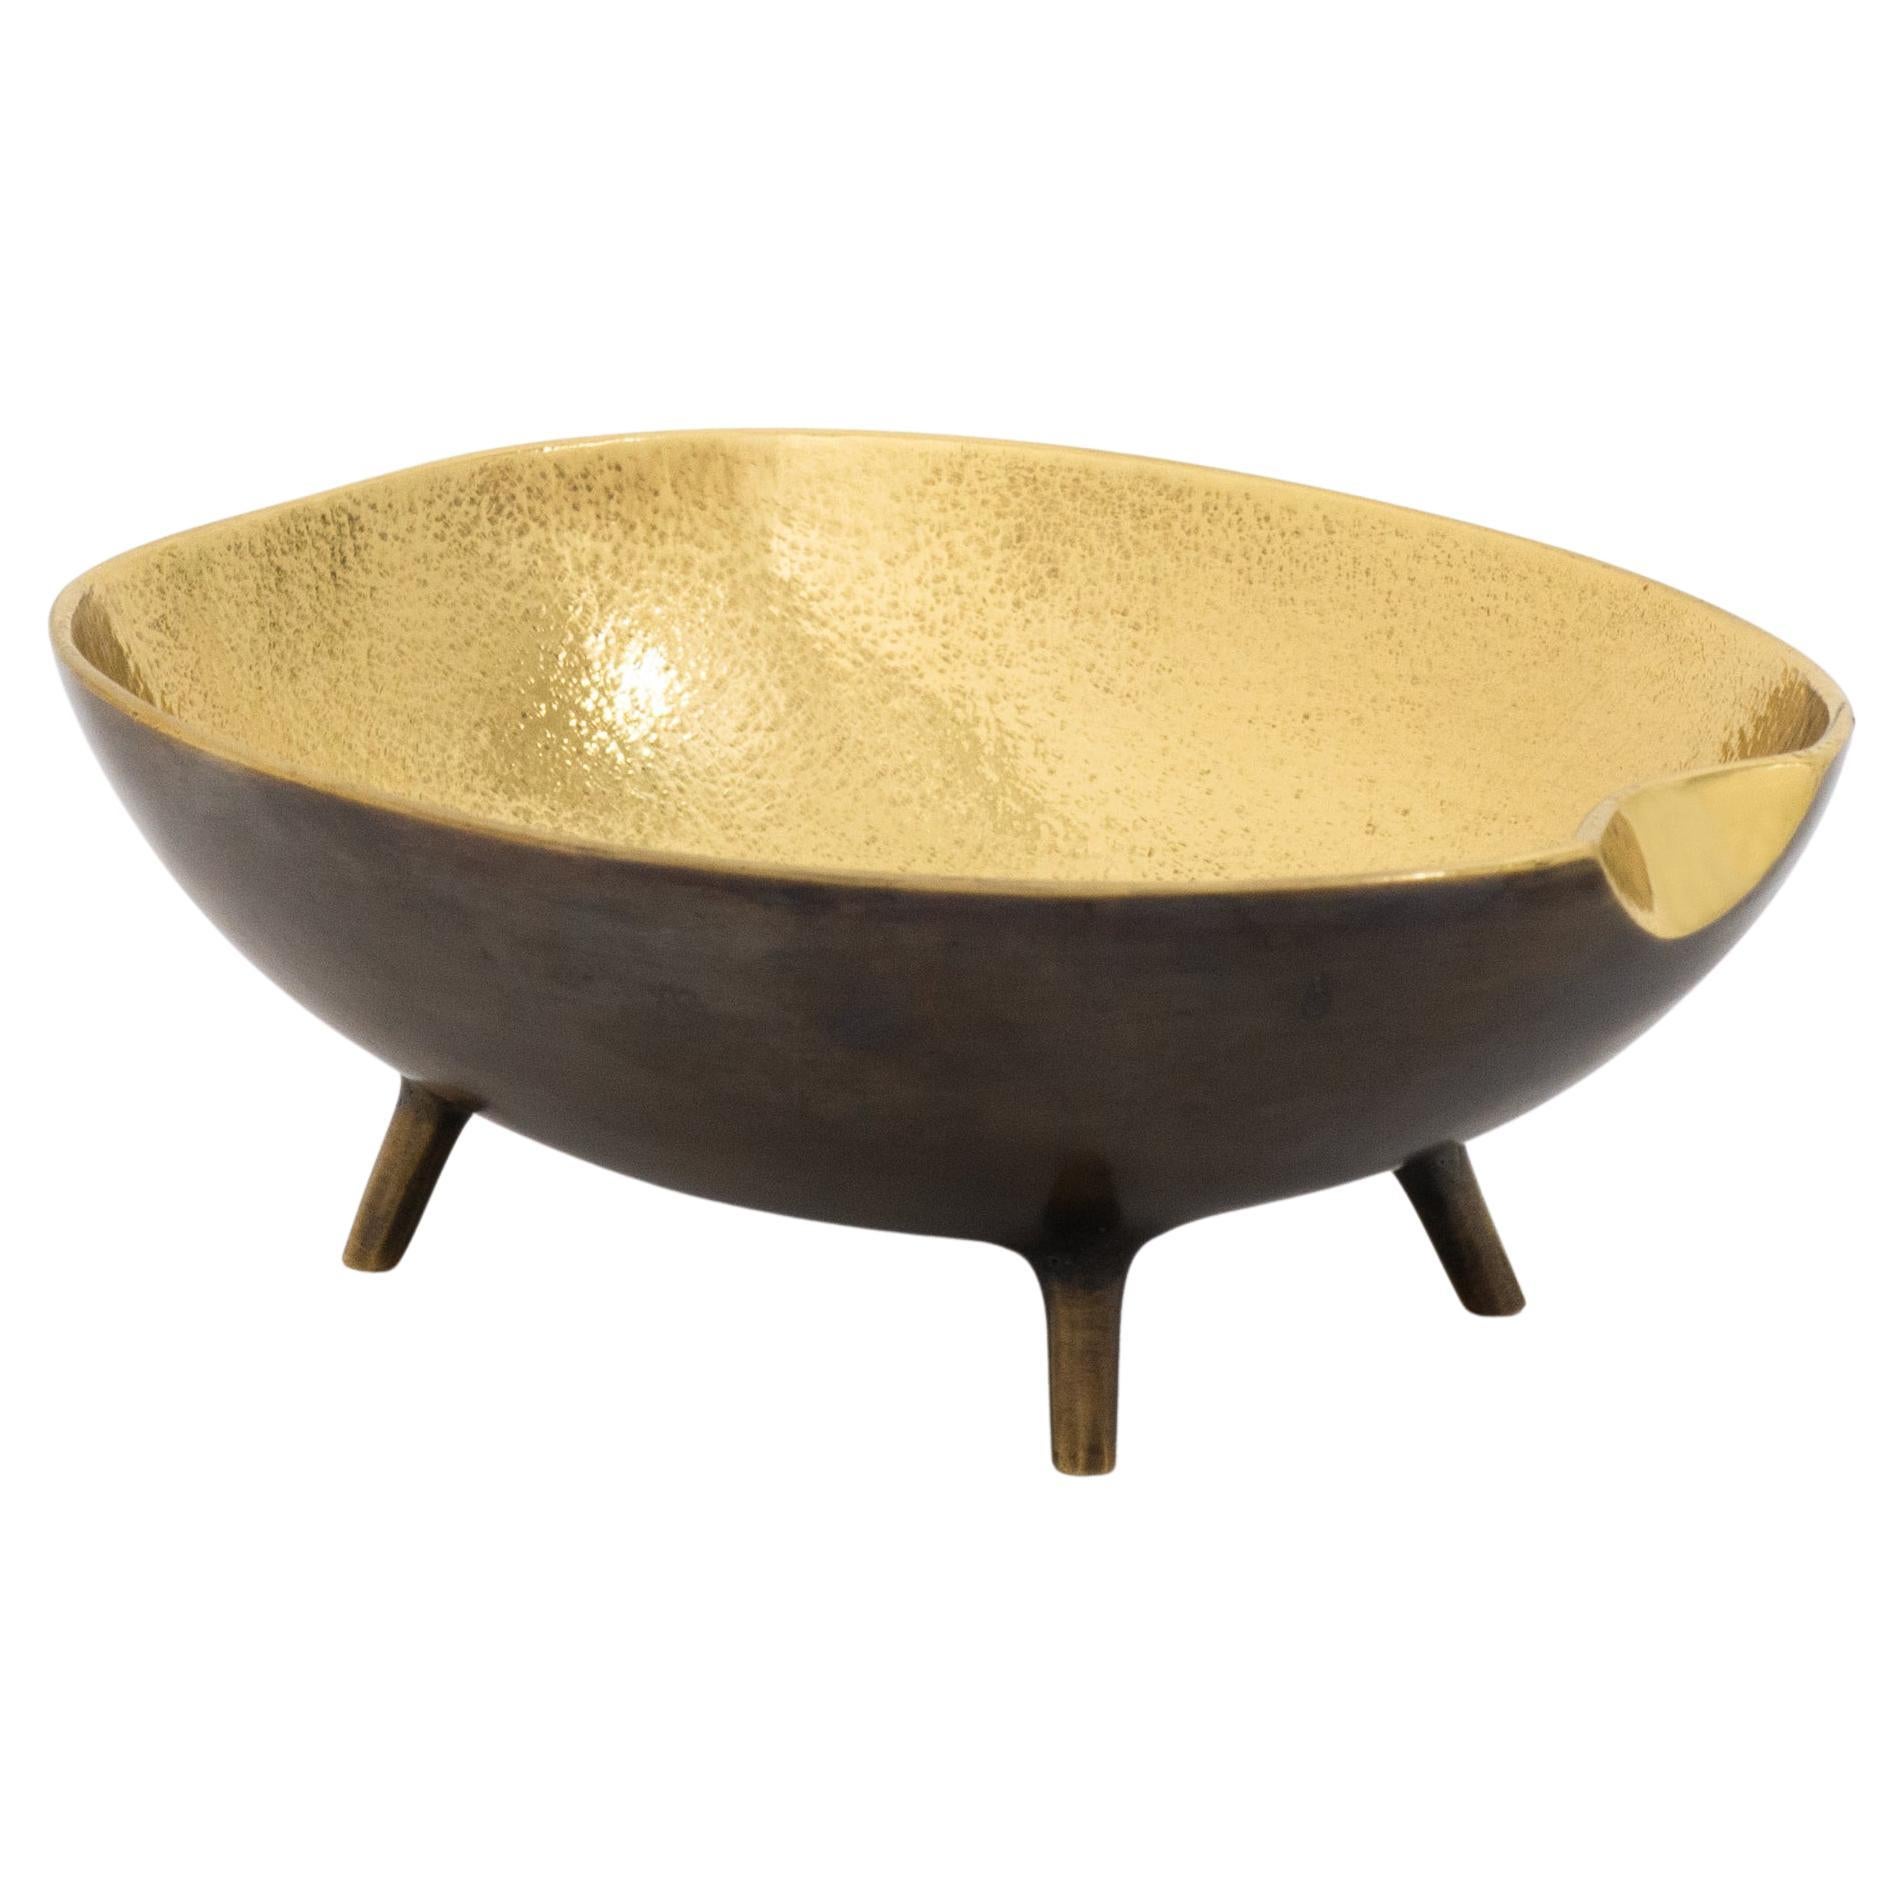 Cast Brass Decorative Bowl with Legs, Vide-poche, with Bronze Patina For Sale